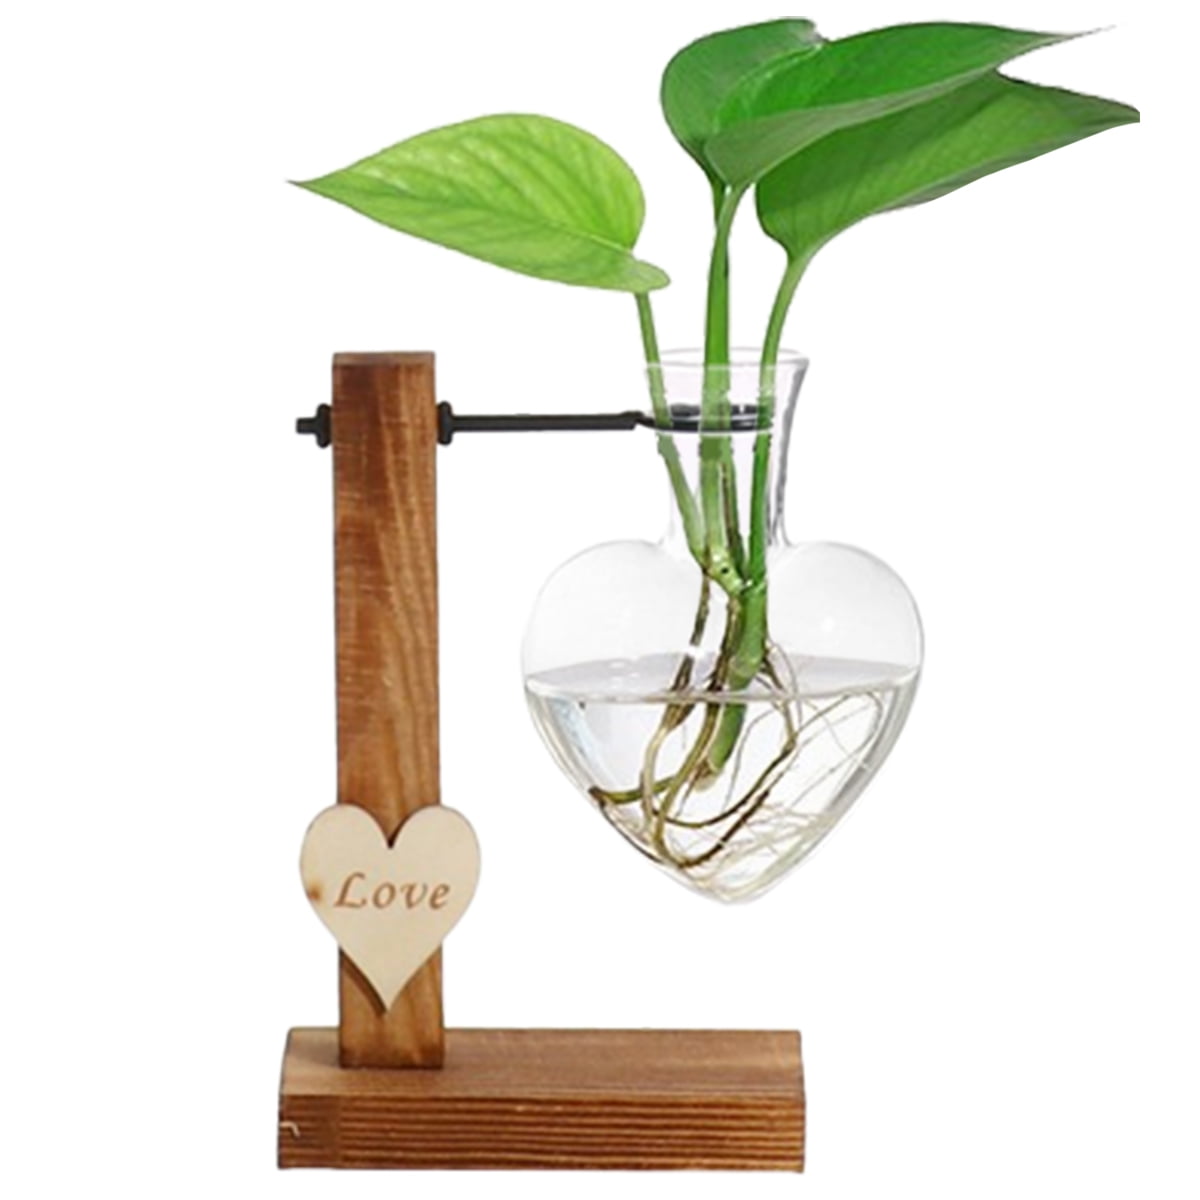 Creative Double Heart Glass Hydroponic Vases Glass Plant Terrarium with Wooden Stand Modern Plant Propagation Station Desktop Planter Bulb Vase for Home Garden Office Decoration 